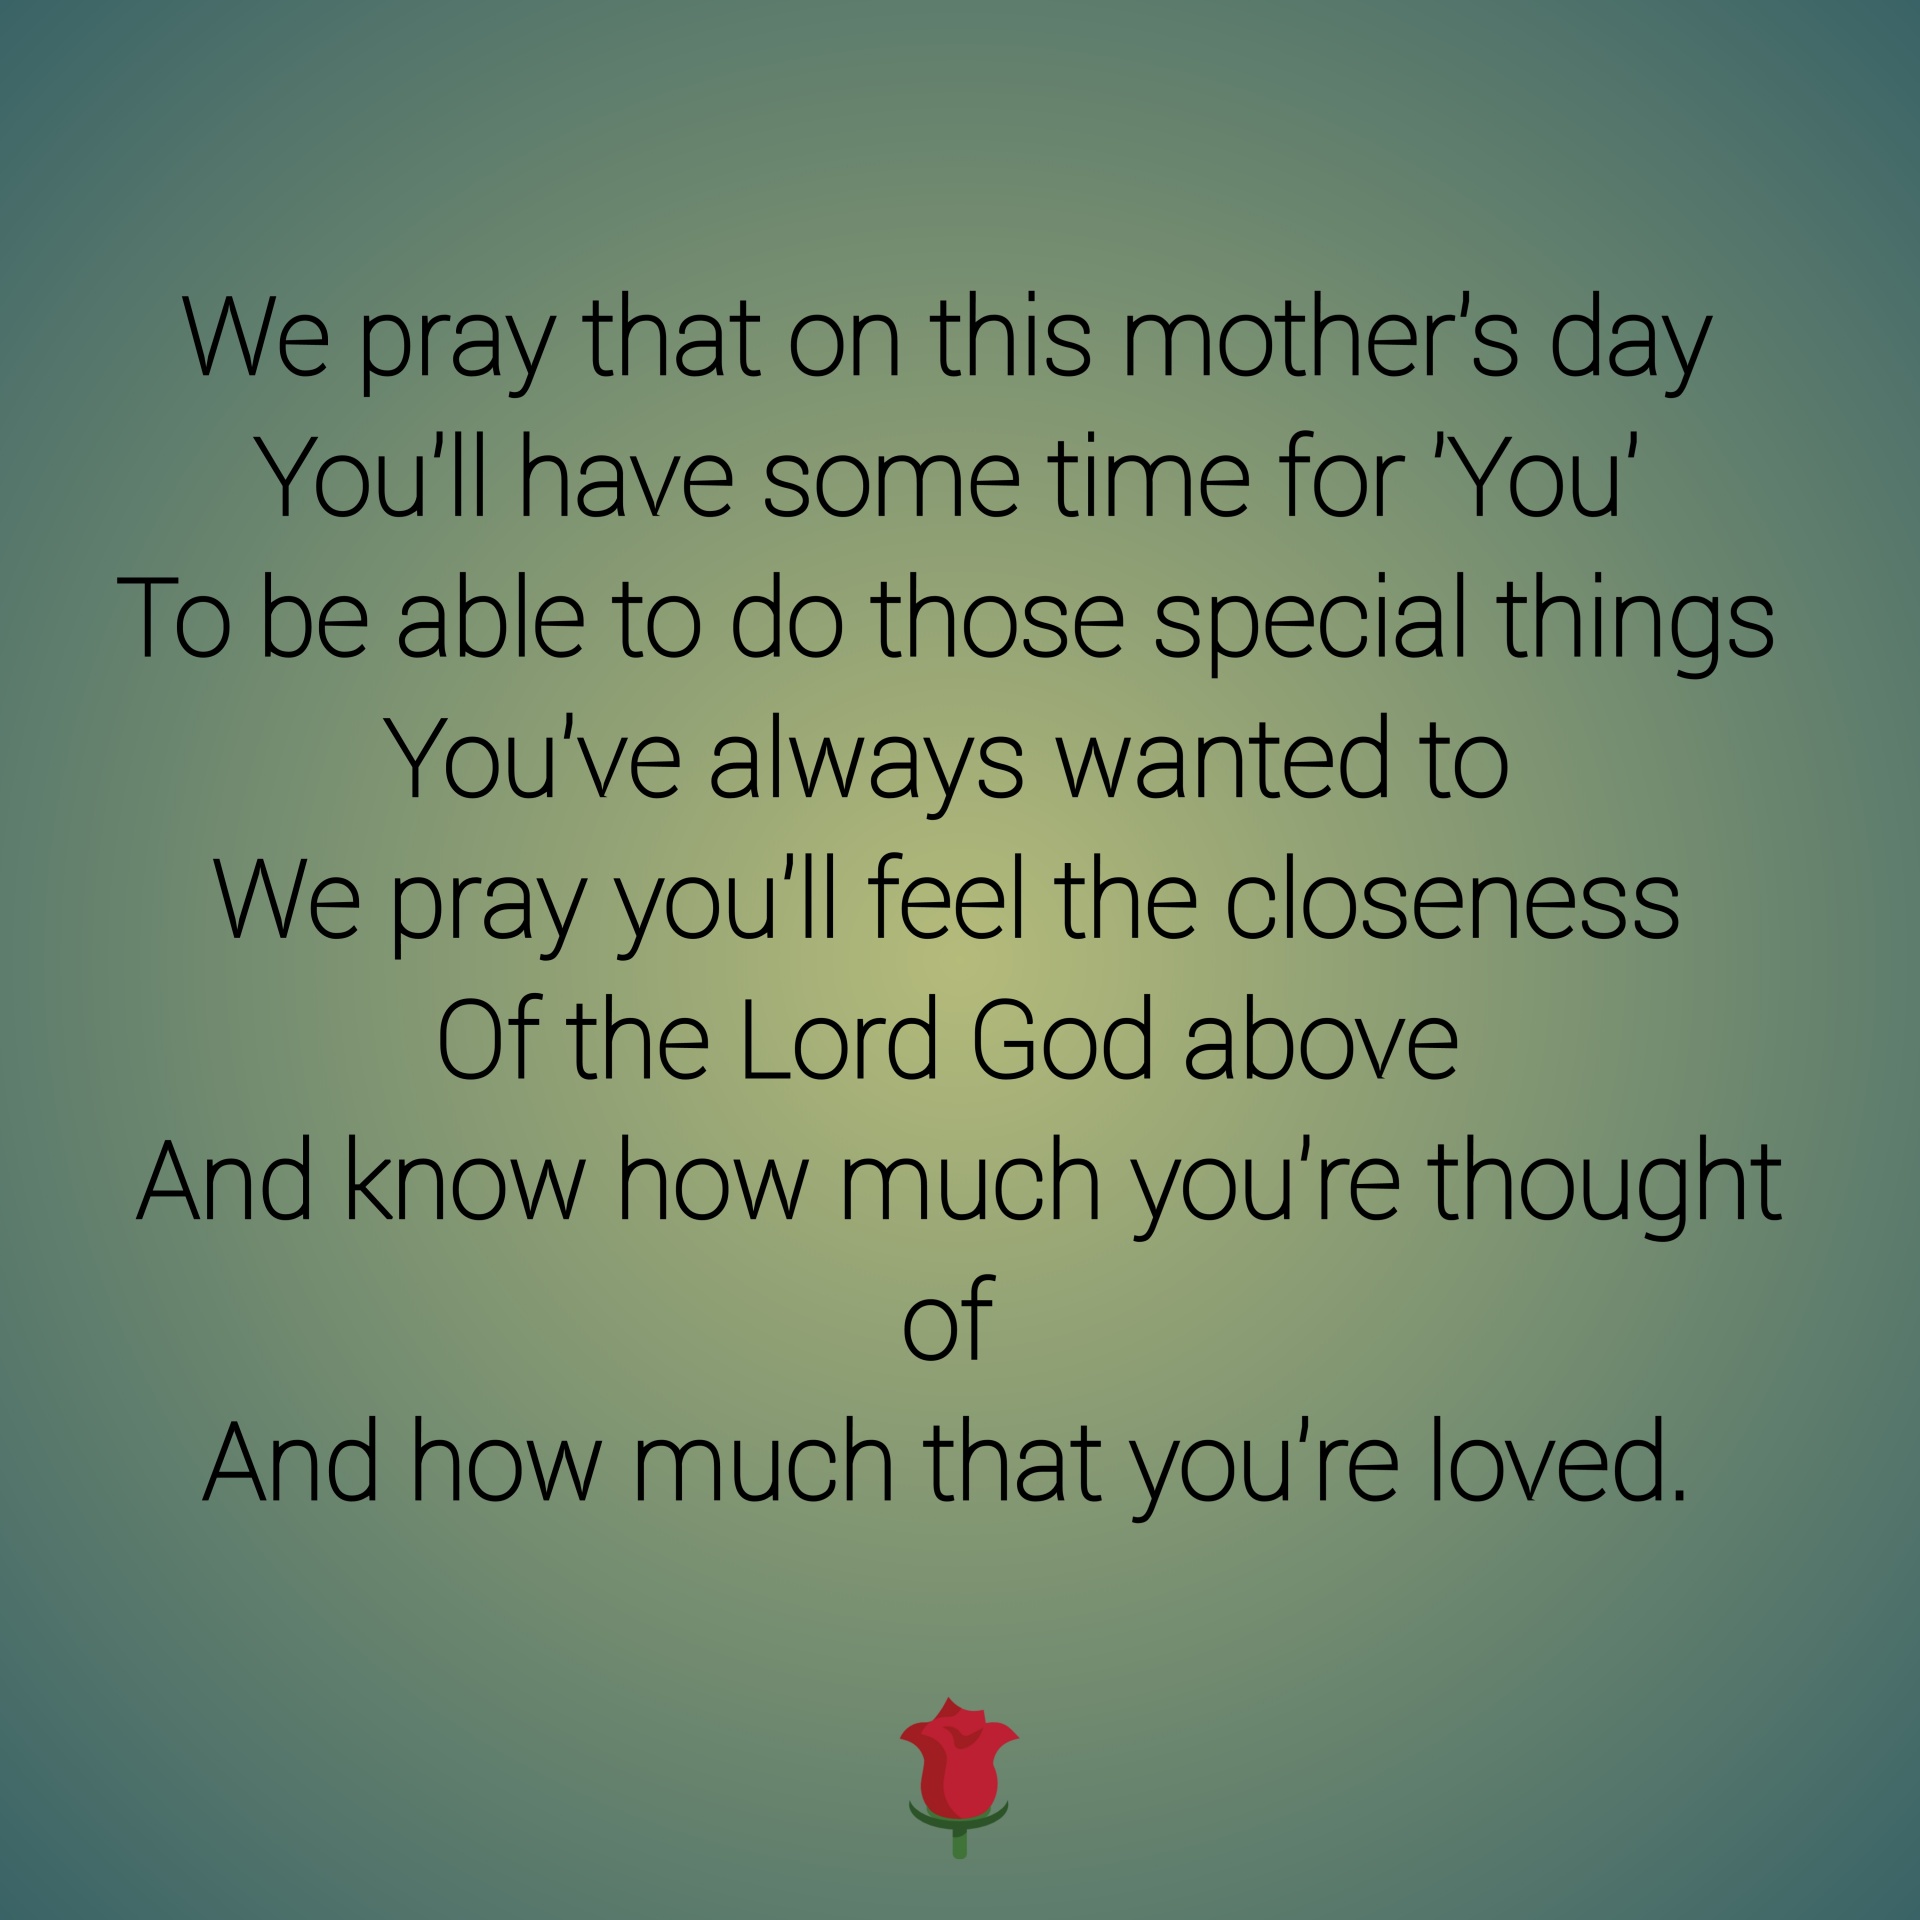 We pray that on this mother's day You'll have some time for 'You' To be able to do those special things You've always wanted to We pray you'll feel the closeness Of the Lord God above And know how much you're thought of